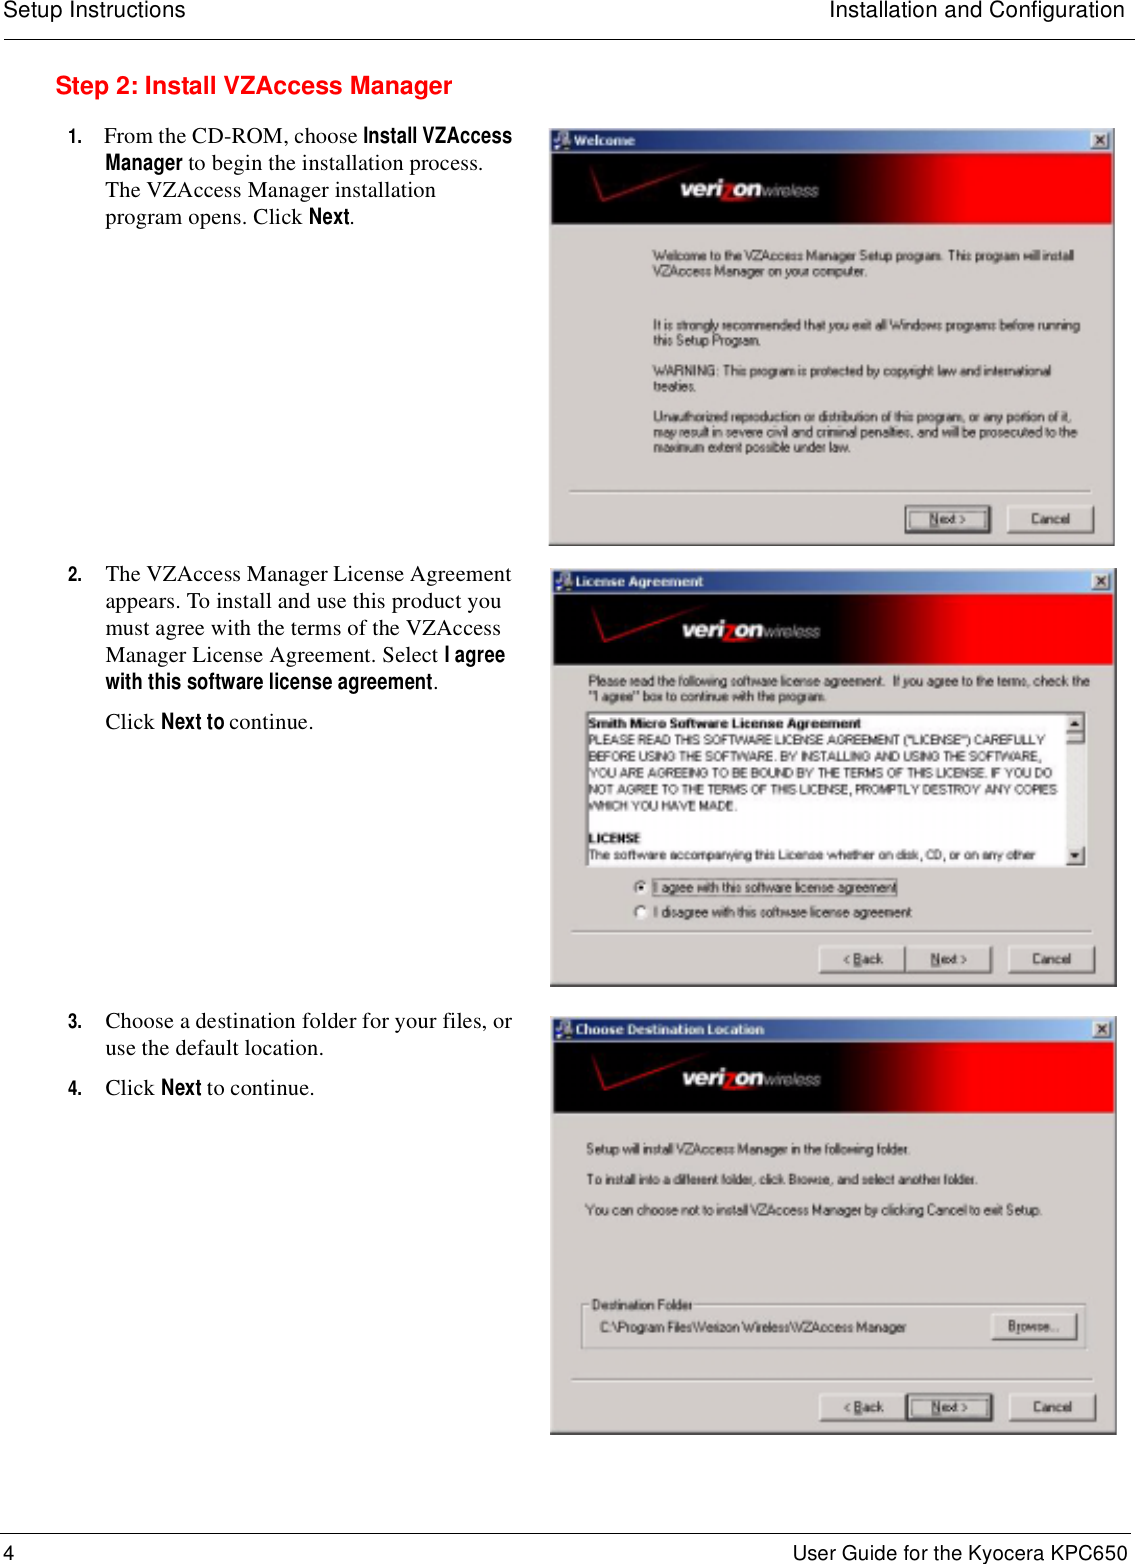 Setup Instructions Installation and Configuration4 User Guide for the Kyocera KPC650Step 2: Install VZAccess Manager1. From the CD-ROM, choose Install VZAccess Manager to begin the installation process. The VZAccess Manager installation program opens. Click Next.2. The VZAccess Manager License Agreement appears. To install and use this product you must agree with the terms of the VZAccess Manager License Agreement. Select I agree with this software license agreement.Click Next to continue.3. Choose a destination folder for your files, or use the default location.4. Click Next to continue.